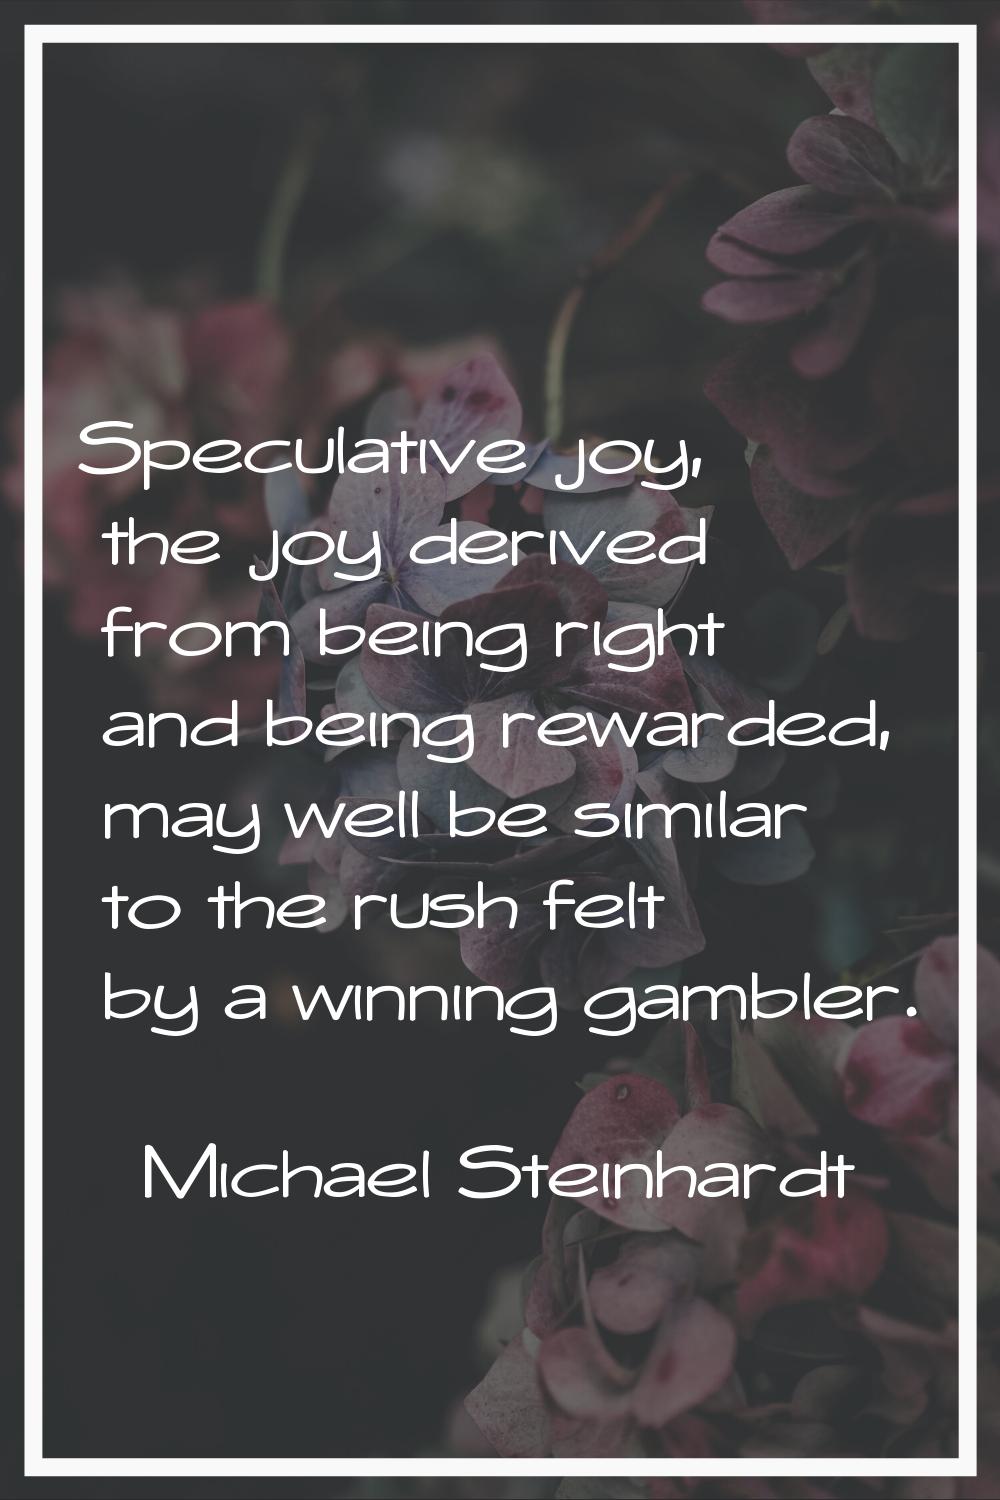 Speculative joy, the joy derived from being right and being rewarded, may well be similar to the ru